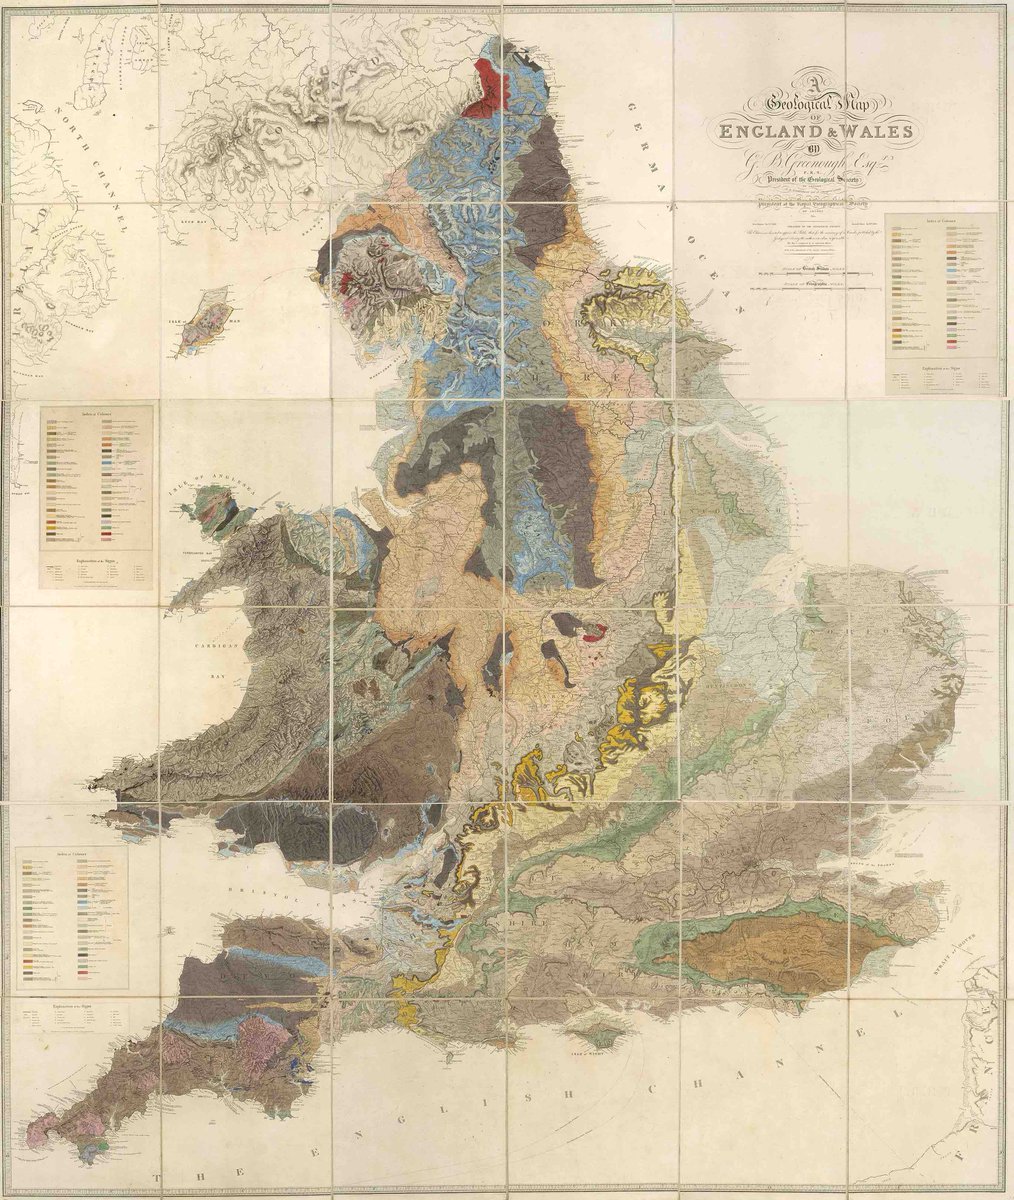 And here is the 1840 2nd edition. Greenough improved both geology and colours without losing his original naturalistic aims: 'The original colouring of a geolog. map demands a great deal of reflection and discrimination – so much so at least as the colouring of a picture.'